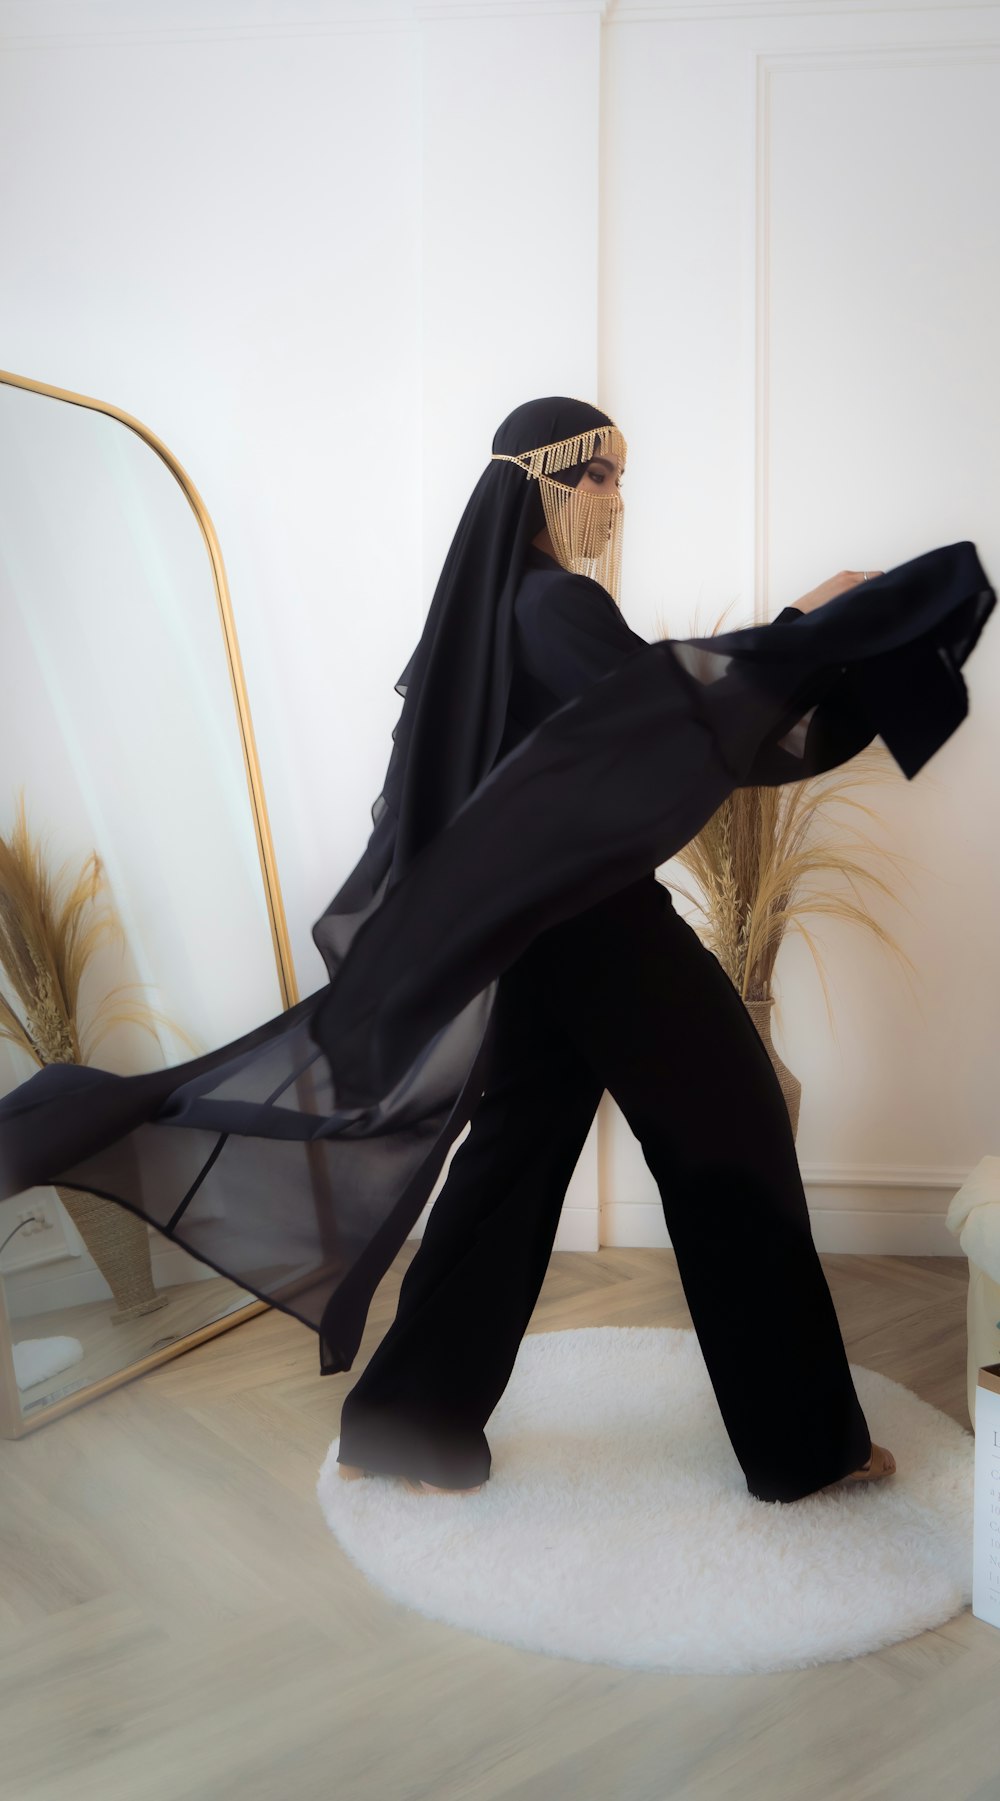 a woman in a black outfit standing on a white rug